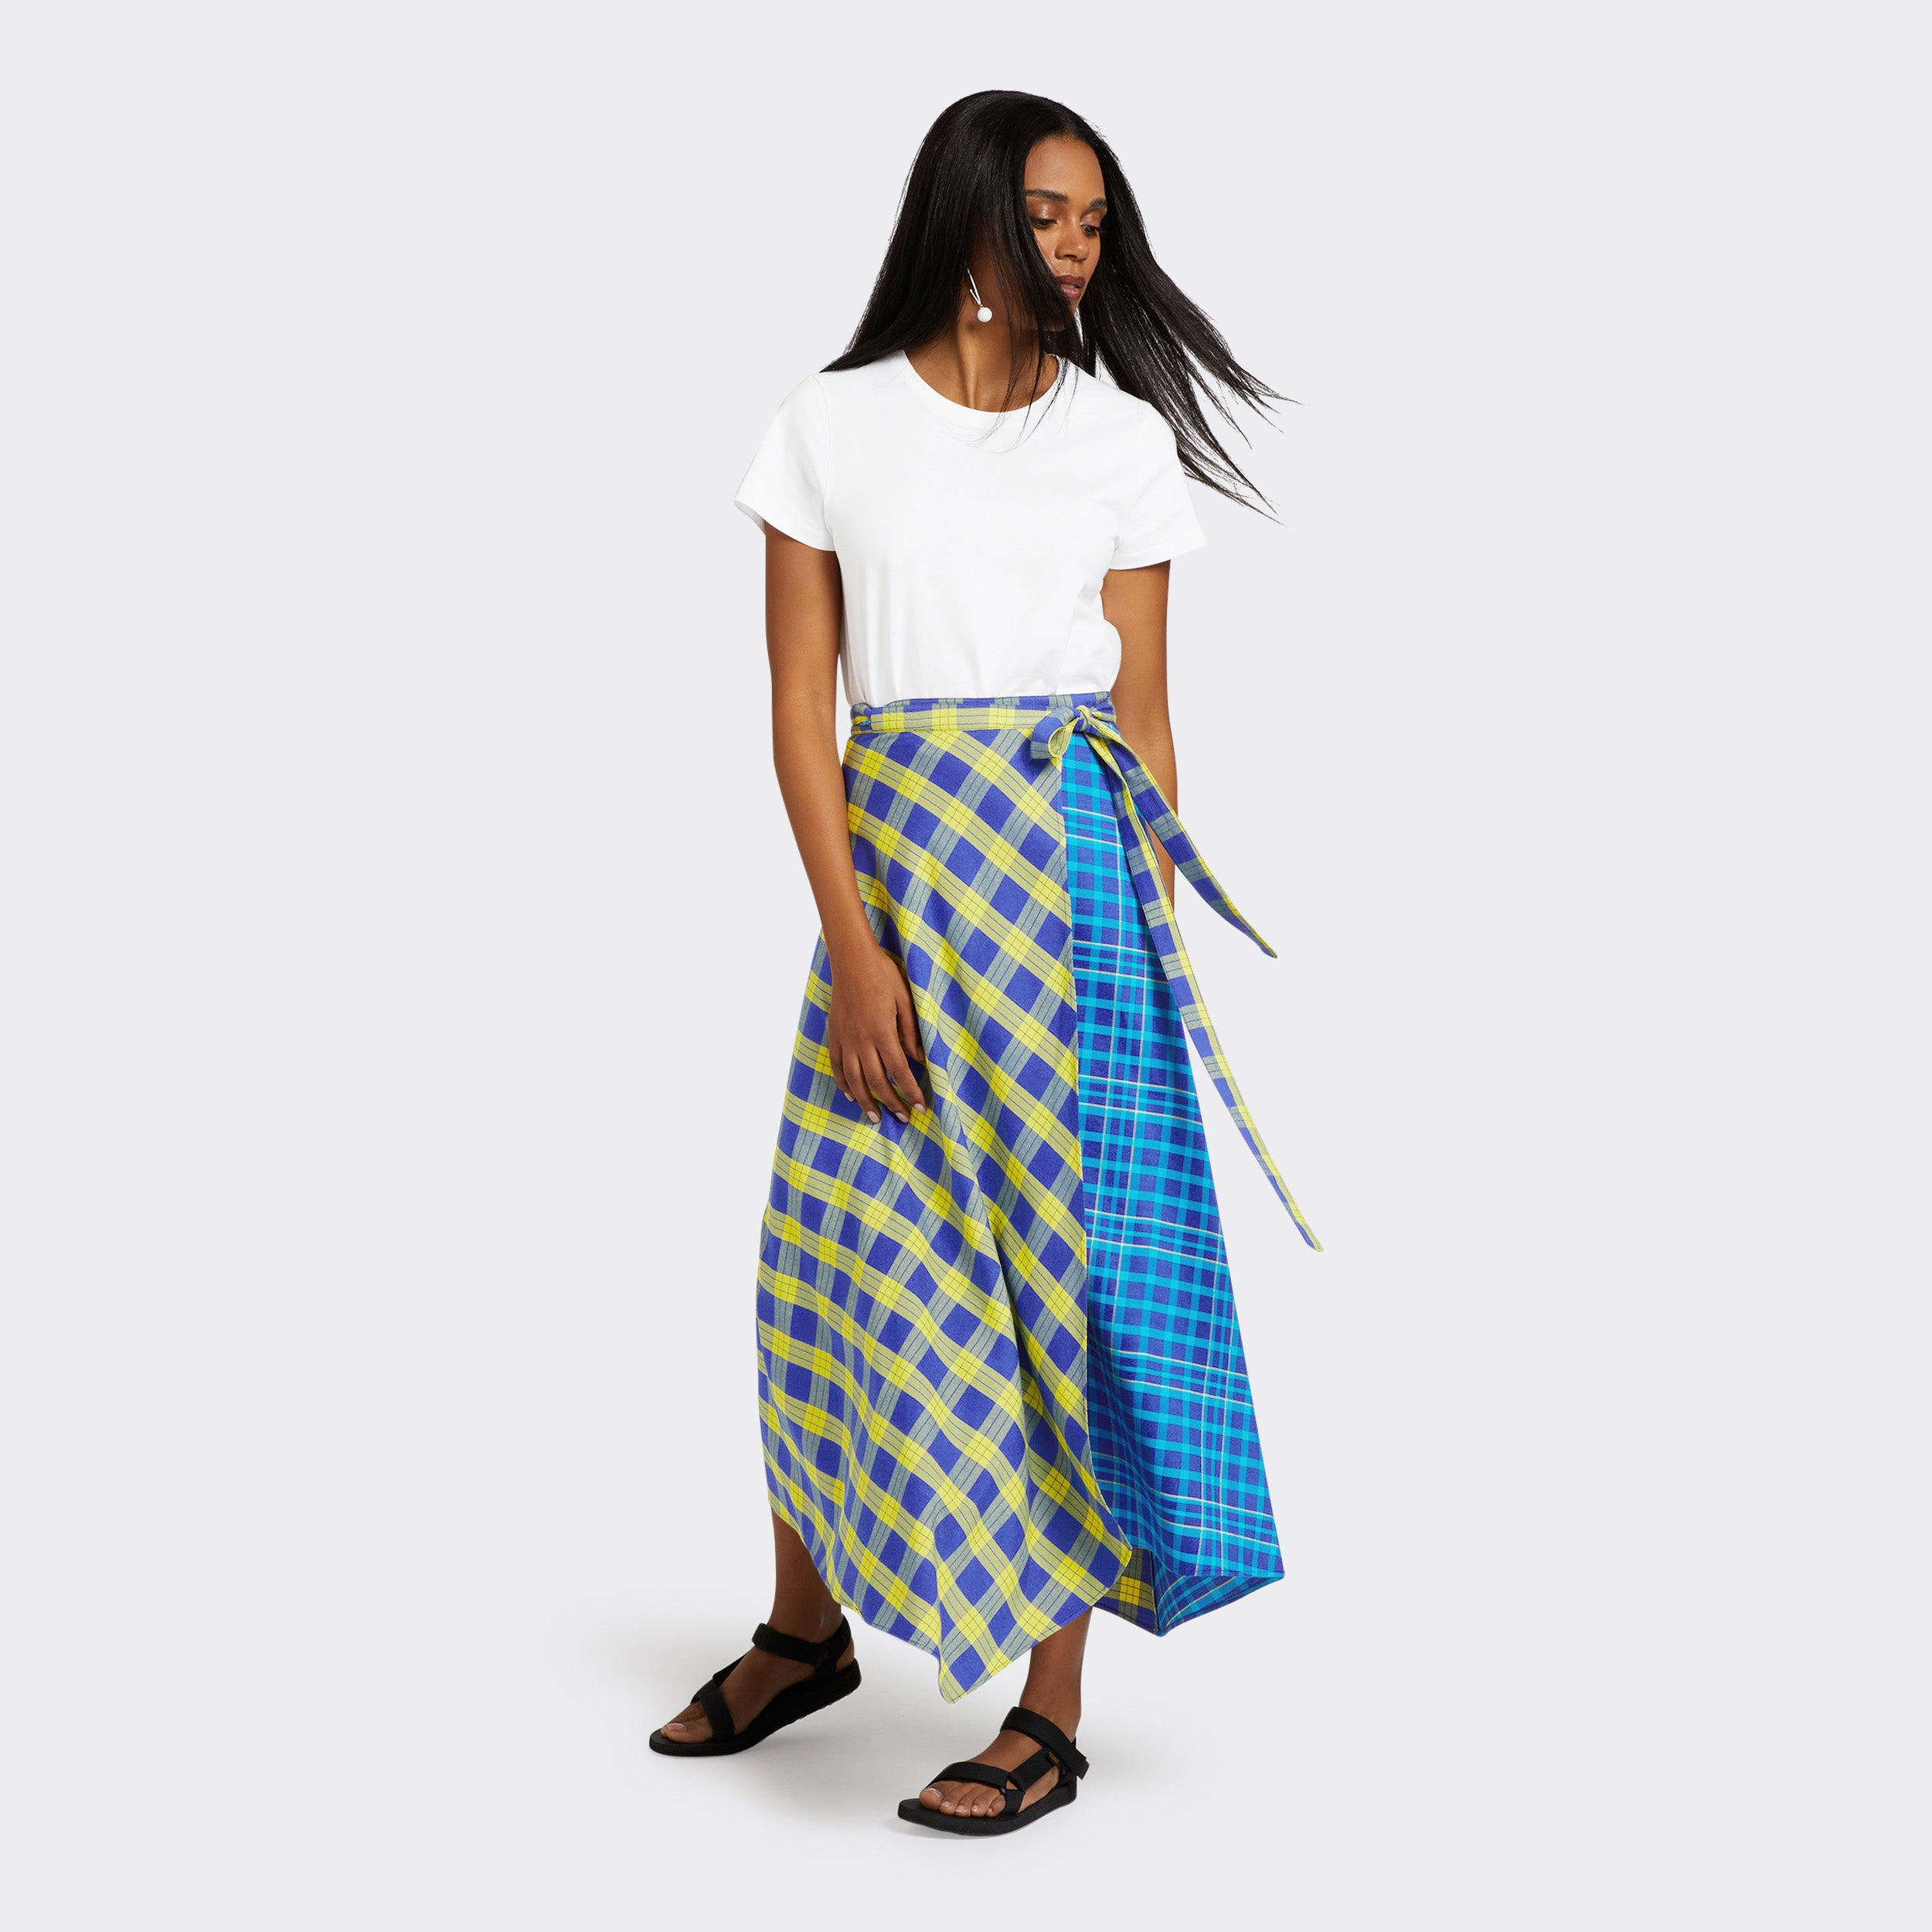 Model wears a Maasai Check wrap skirt in blue and yellow with a plain white tshirt.